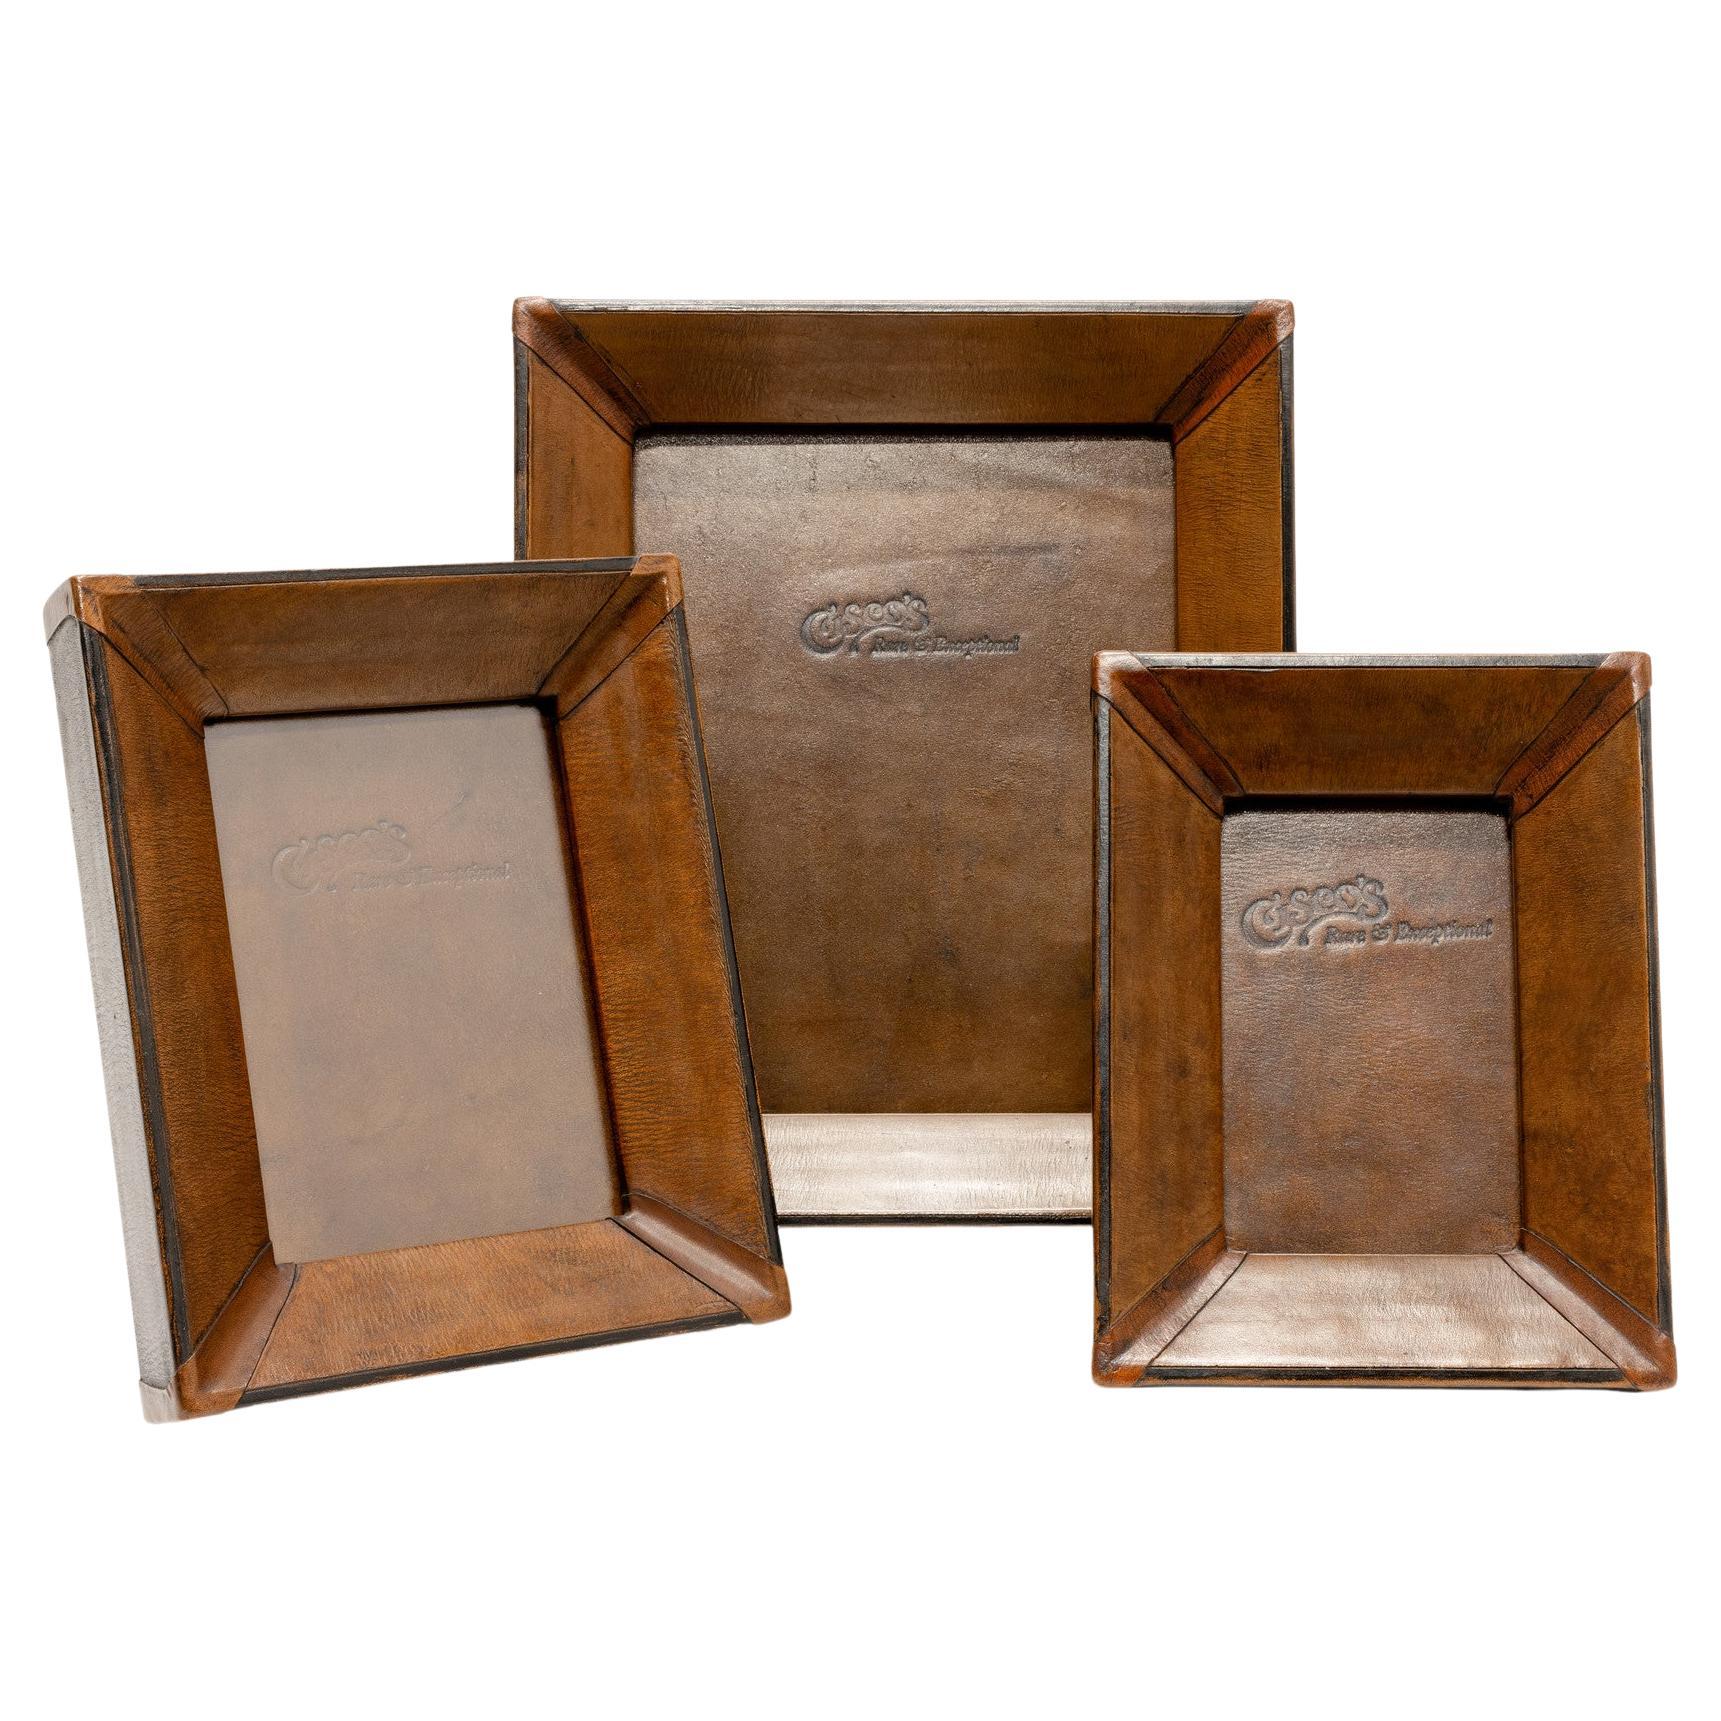 8x10 Medium Brown & Black Leather Tabletop Picture Frame- The Saddle Shop  For Sale